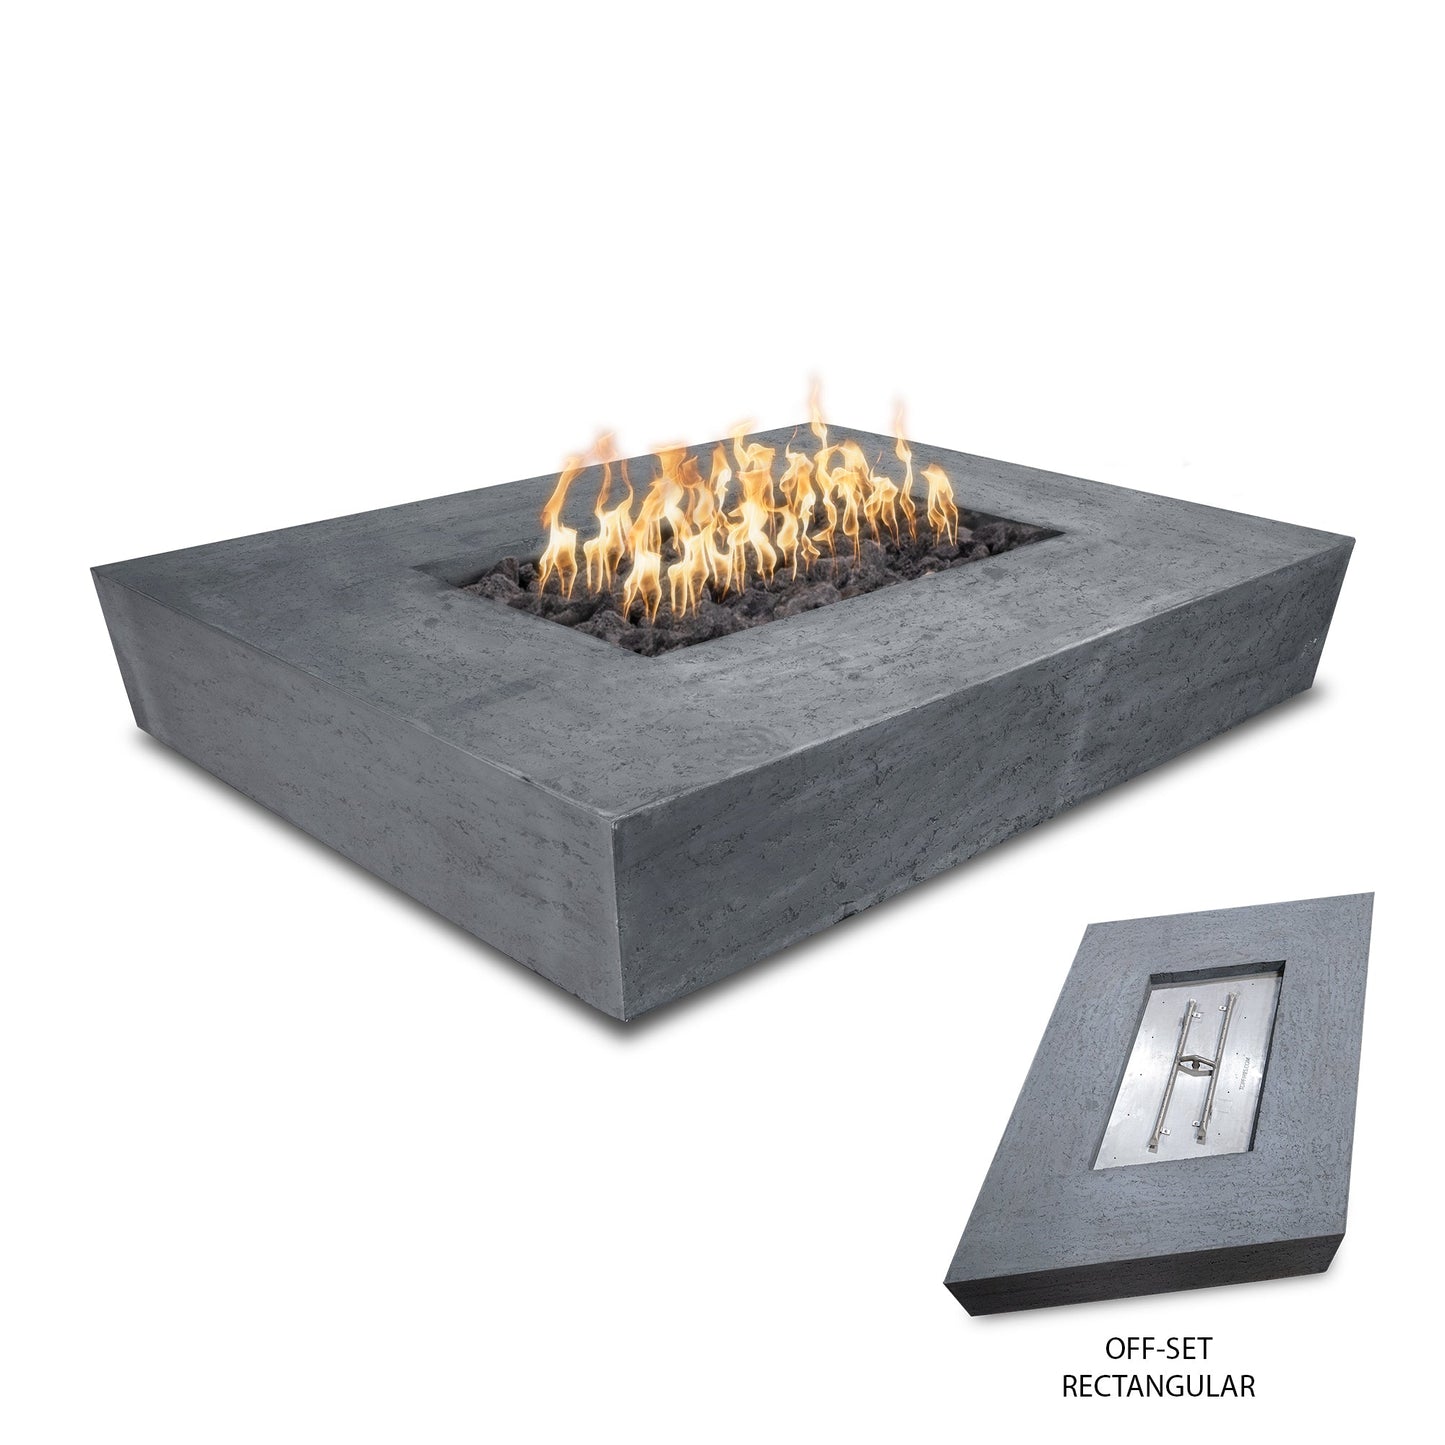 The Outdoor Plus Rectangular Heiko 58" Chestnut GFRC Concrete Liquid Propane Fire Pit with 12V Electronic Ignition